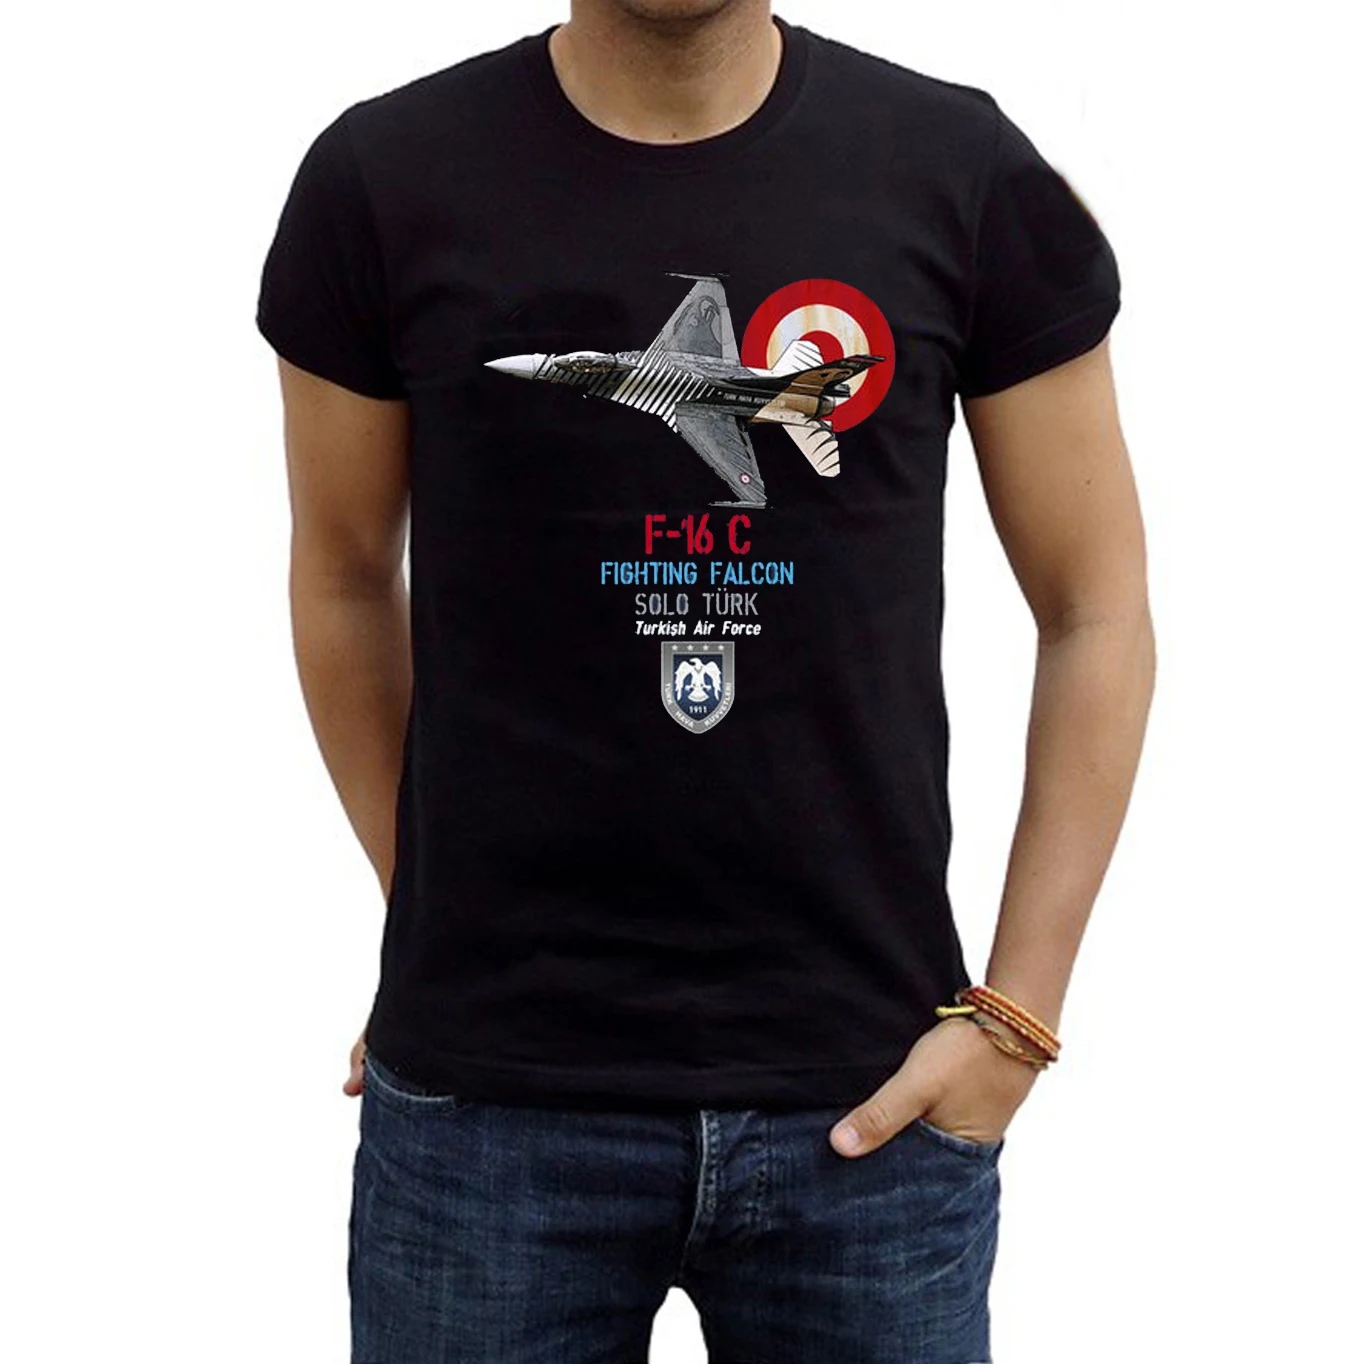 

Turkish Air Force F-16 Fighting Falcon Fighter Aircraft T Shirt New 100% Cotton Short Sleeve O-Neck T-shirt Casual Mens Top